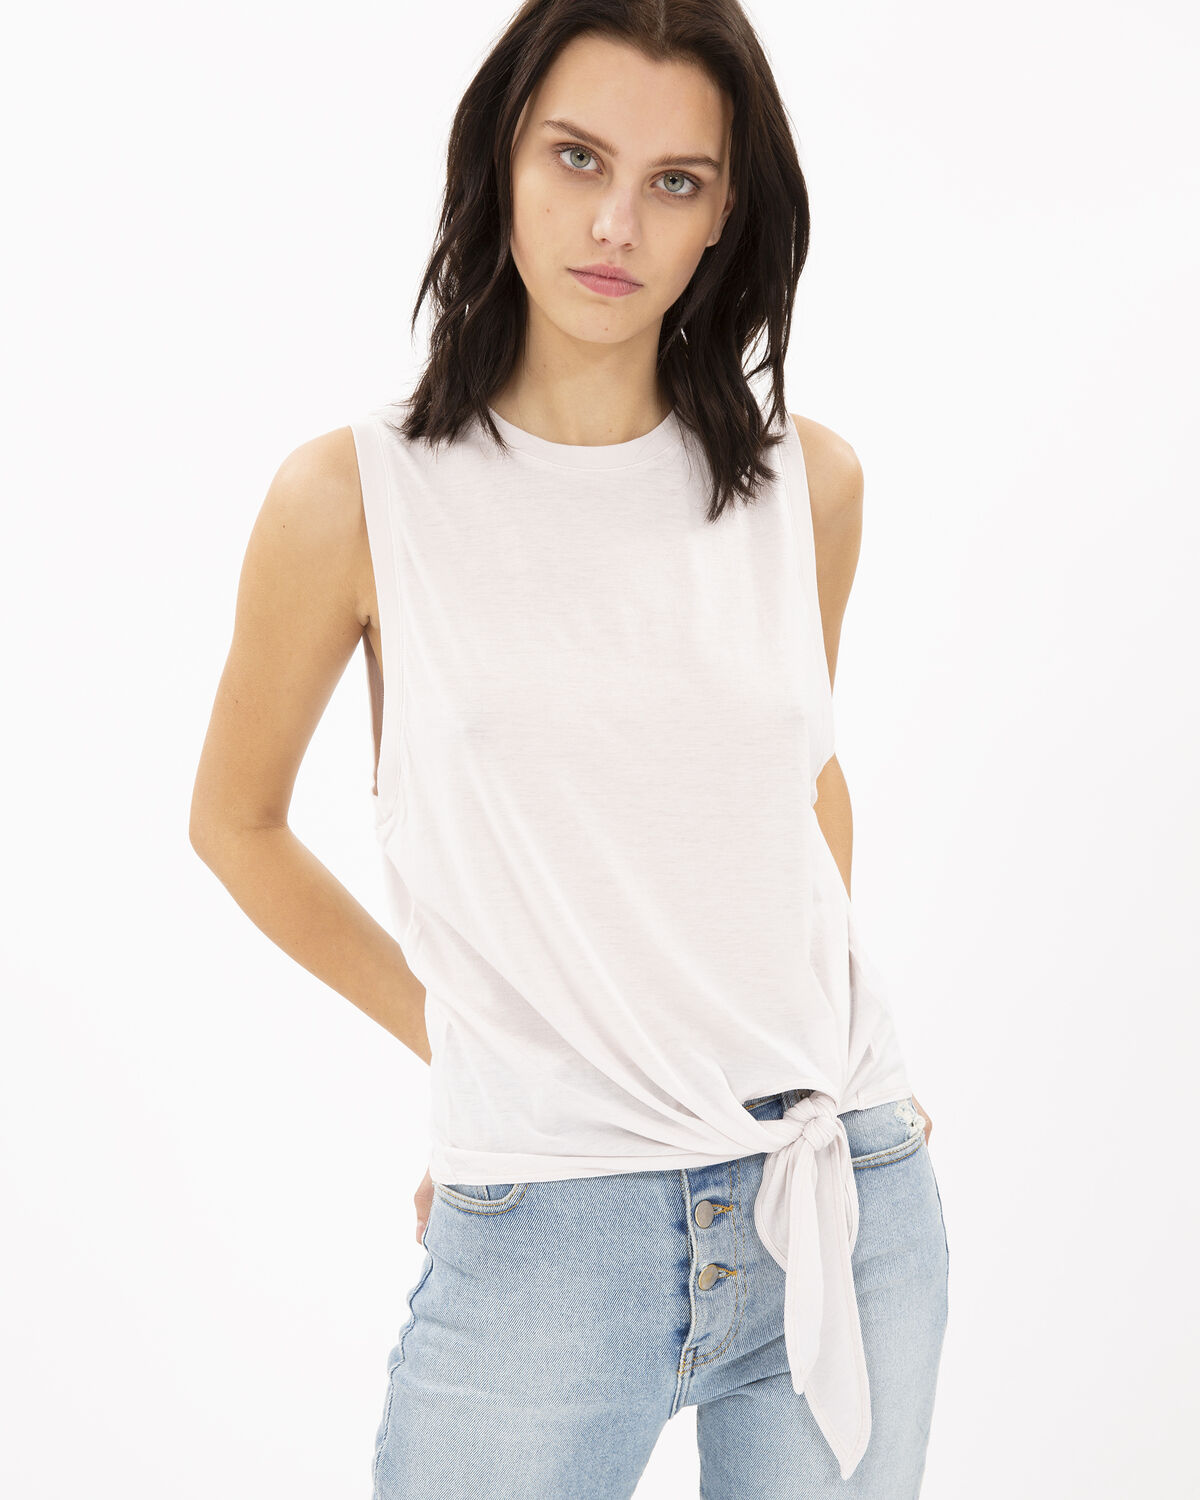 Photo of IRO Paris Impish Tank Top Blush Pink - Beautifully Low-cut, With Its Detail To Tie, This Tank Top Will Reveal Your Silhouette. Go For The Jeans / Sneakers Combo For A Casual Look, Leather Shorts / Sandals For A More Rocky Look. Spring Summer 19